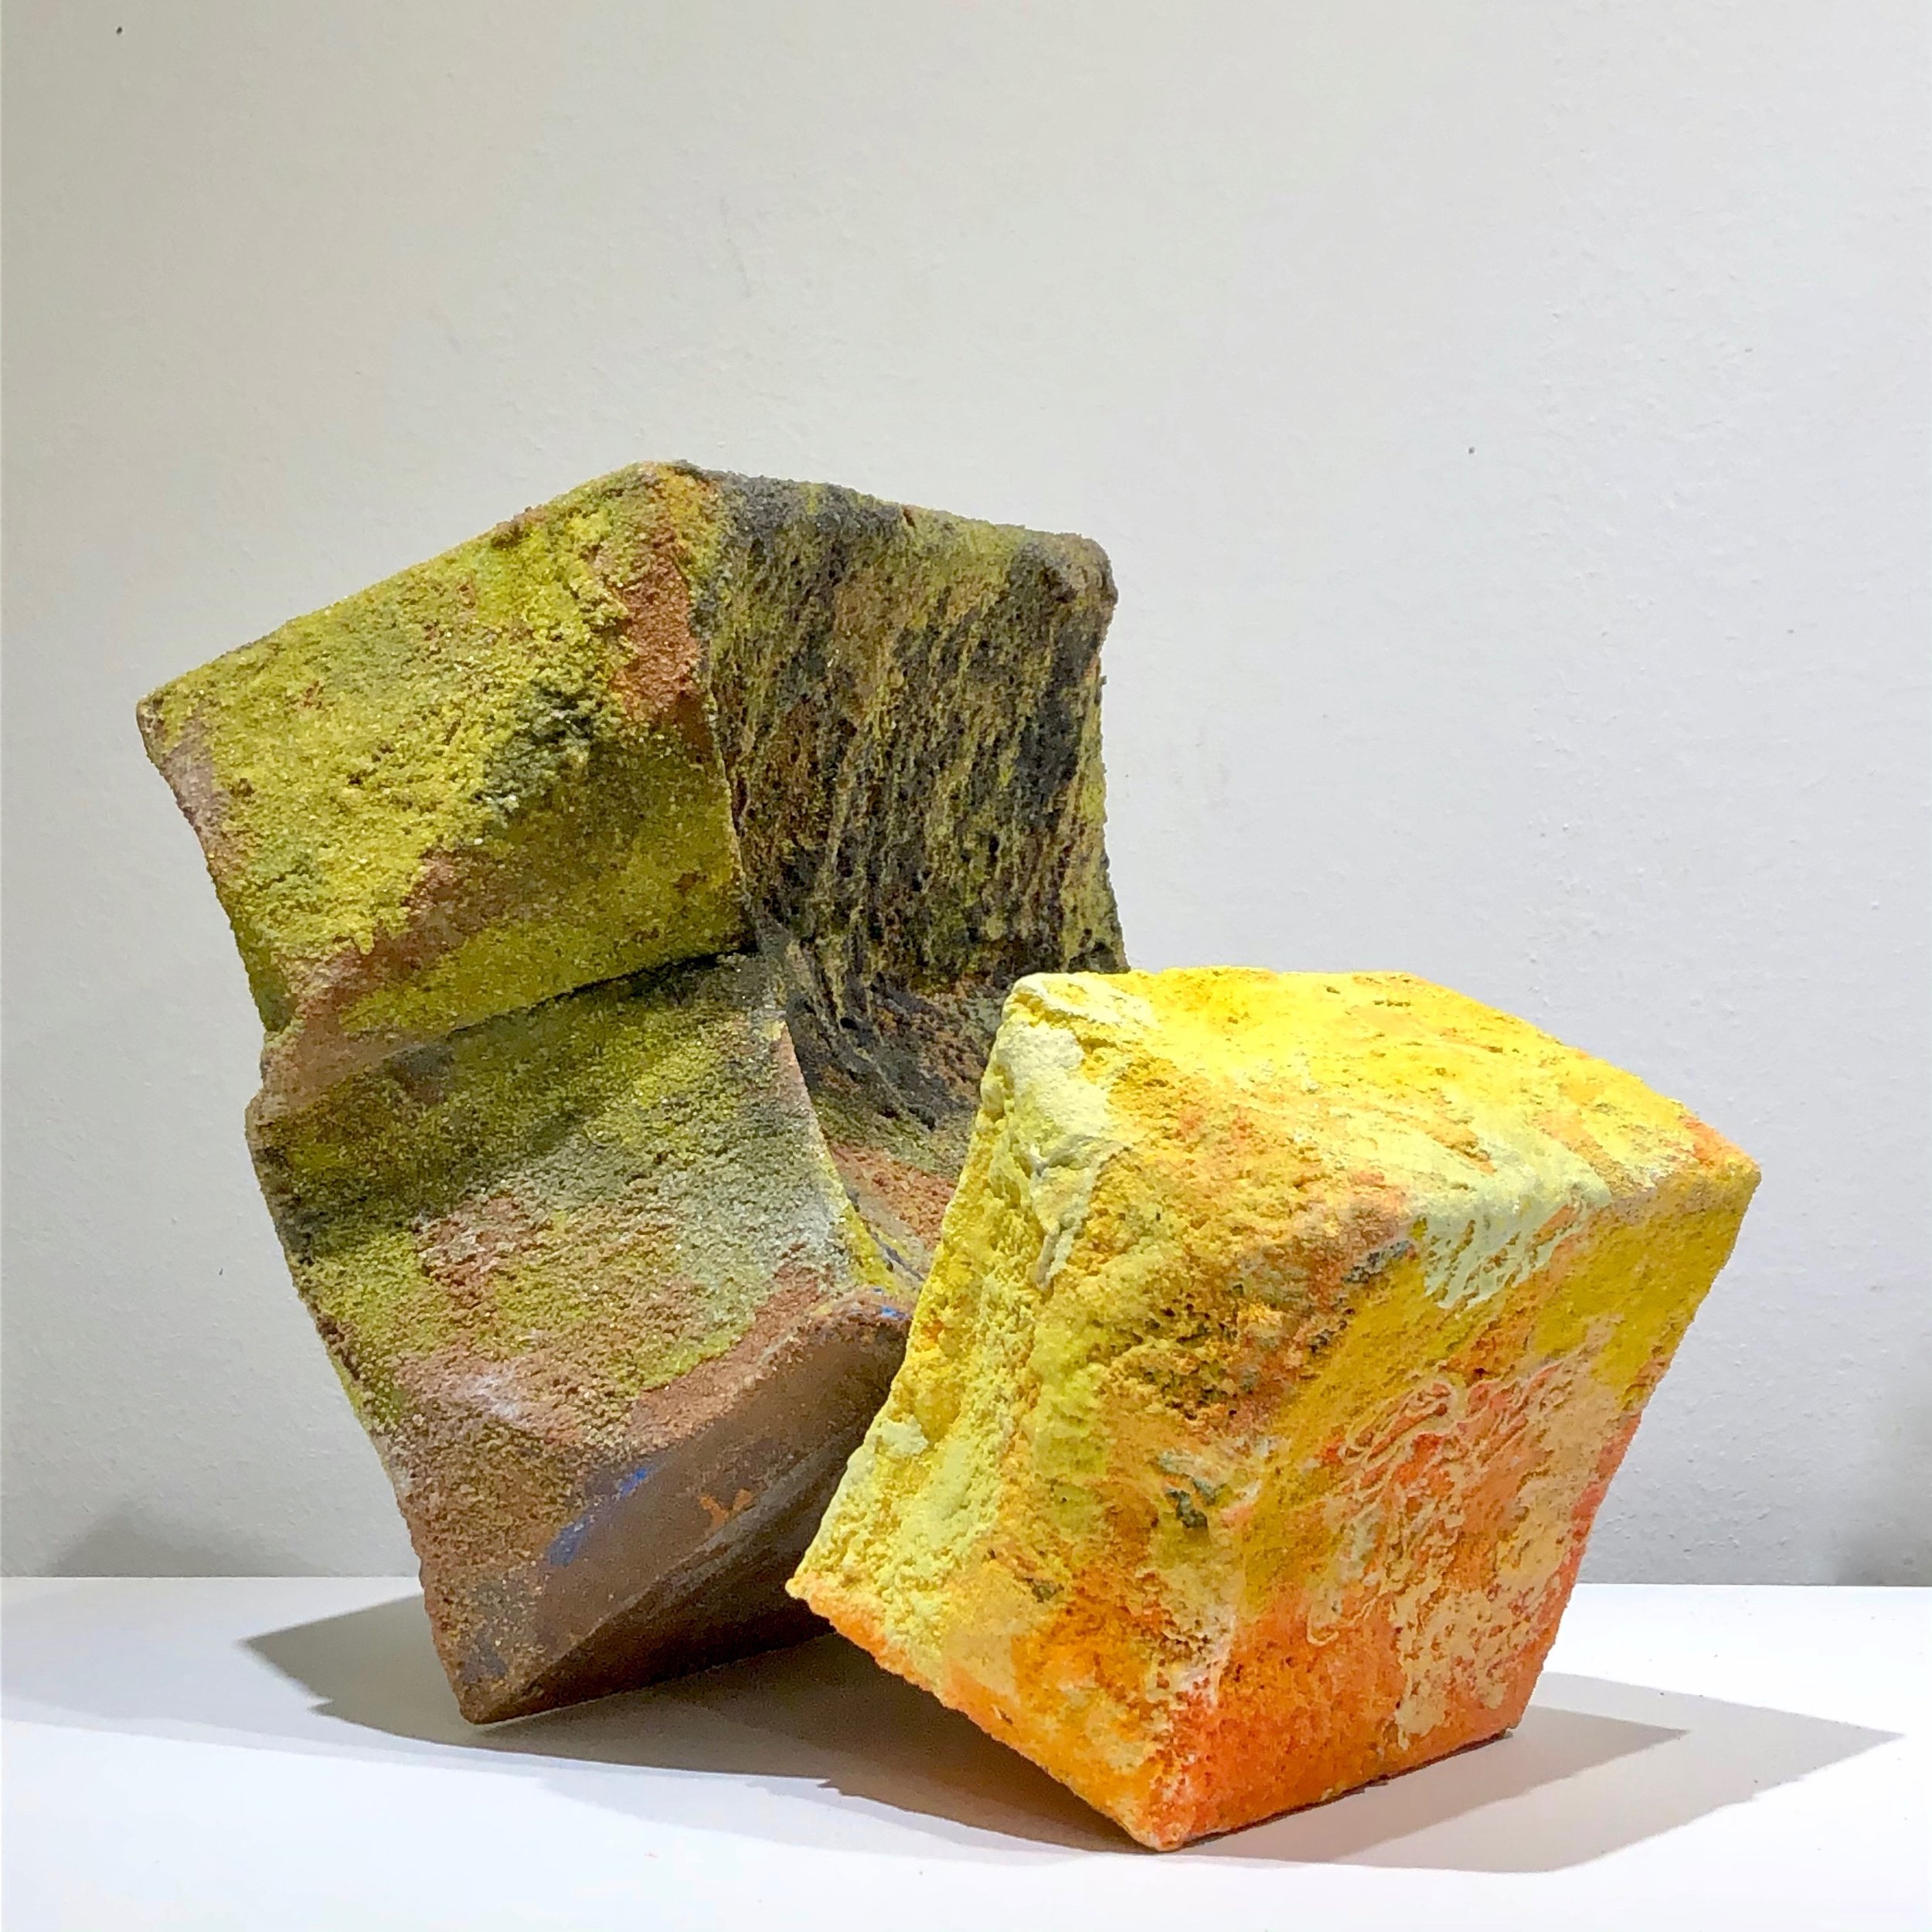 2 Mark Van Wagner_Heavy Weights_2021_natural and colored sand on cardboard boxes_12x15x15in.jpeg